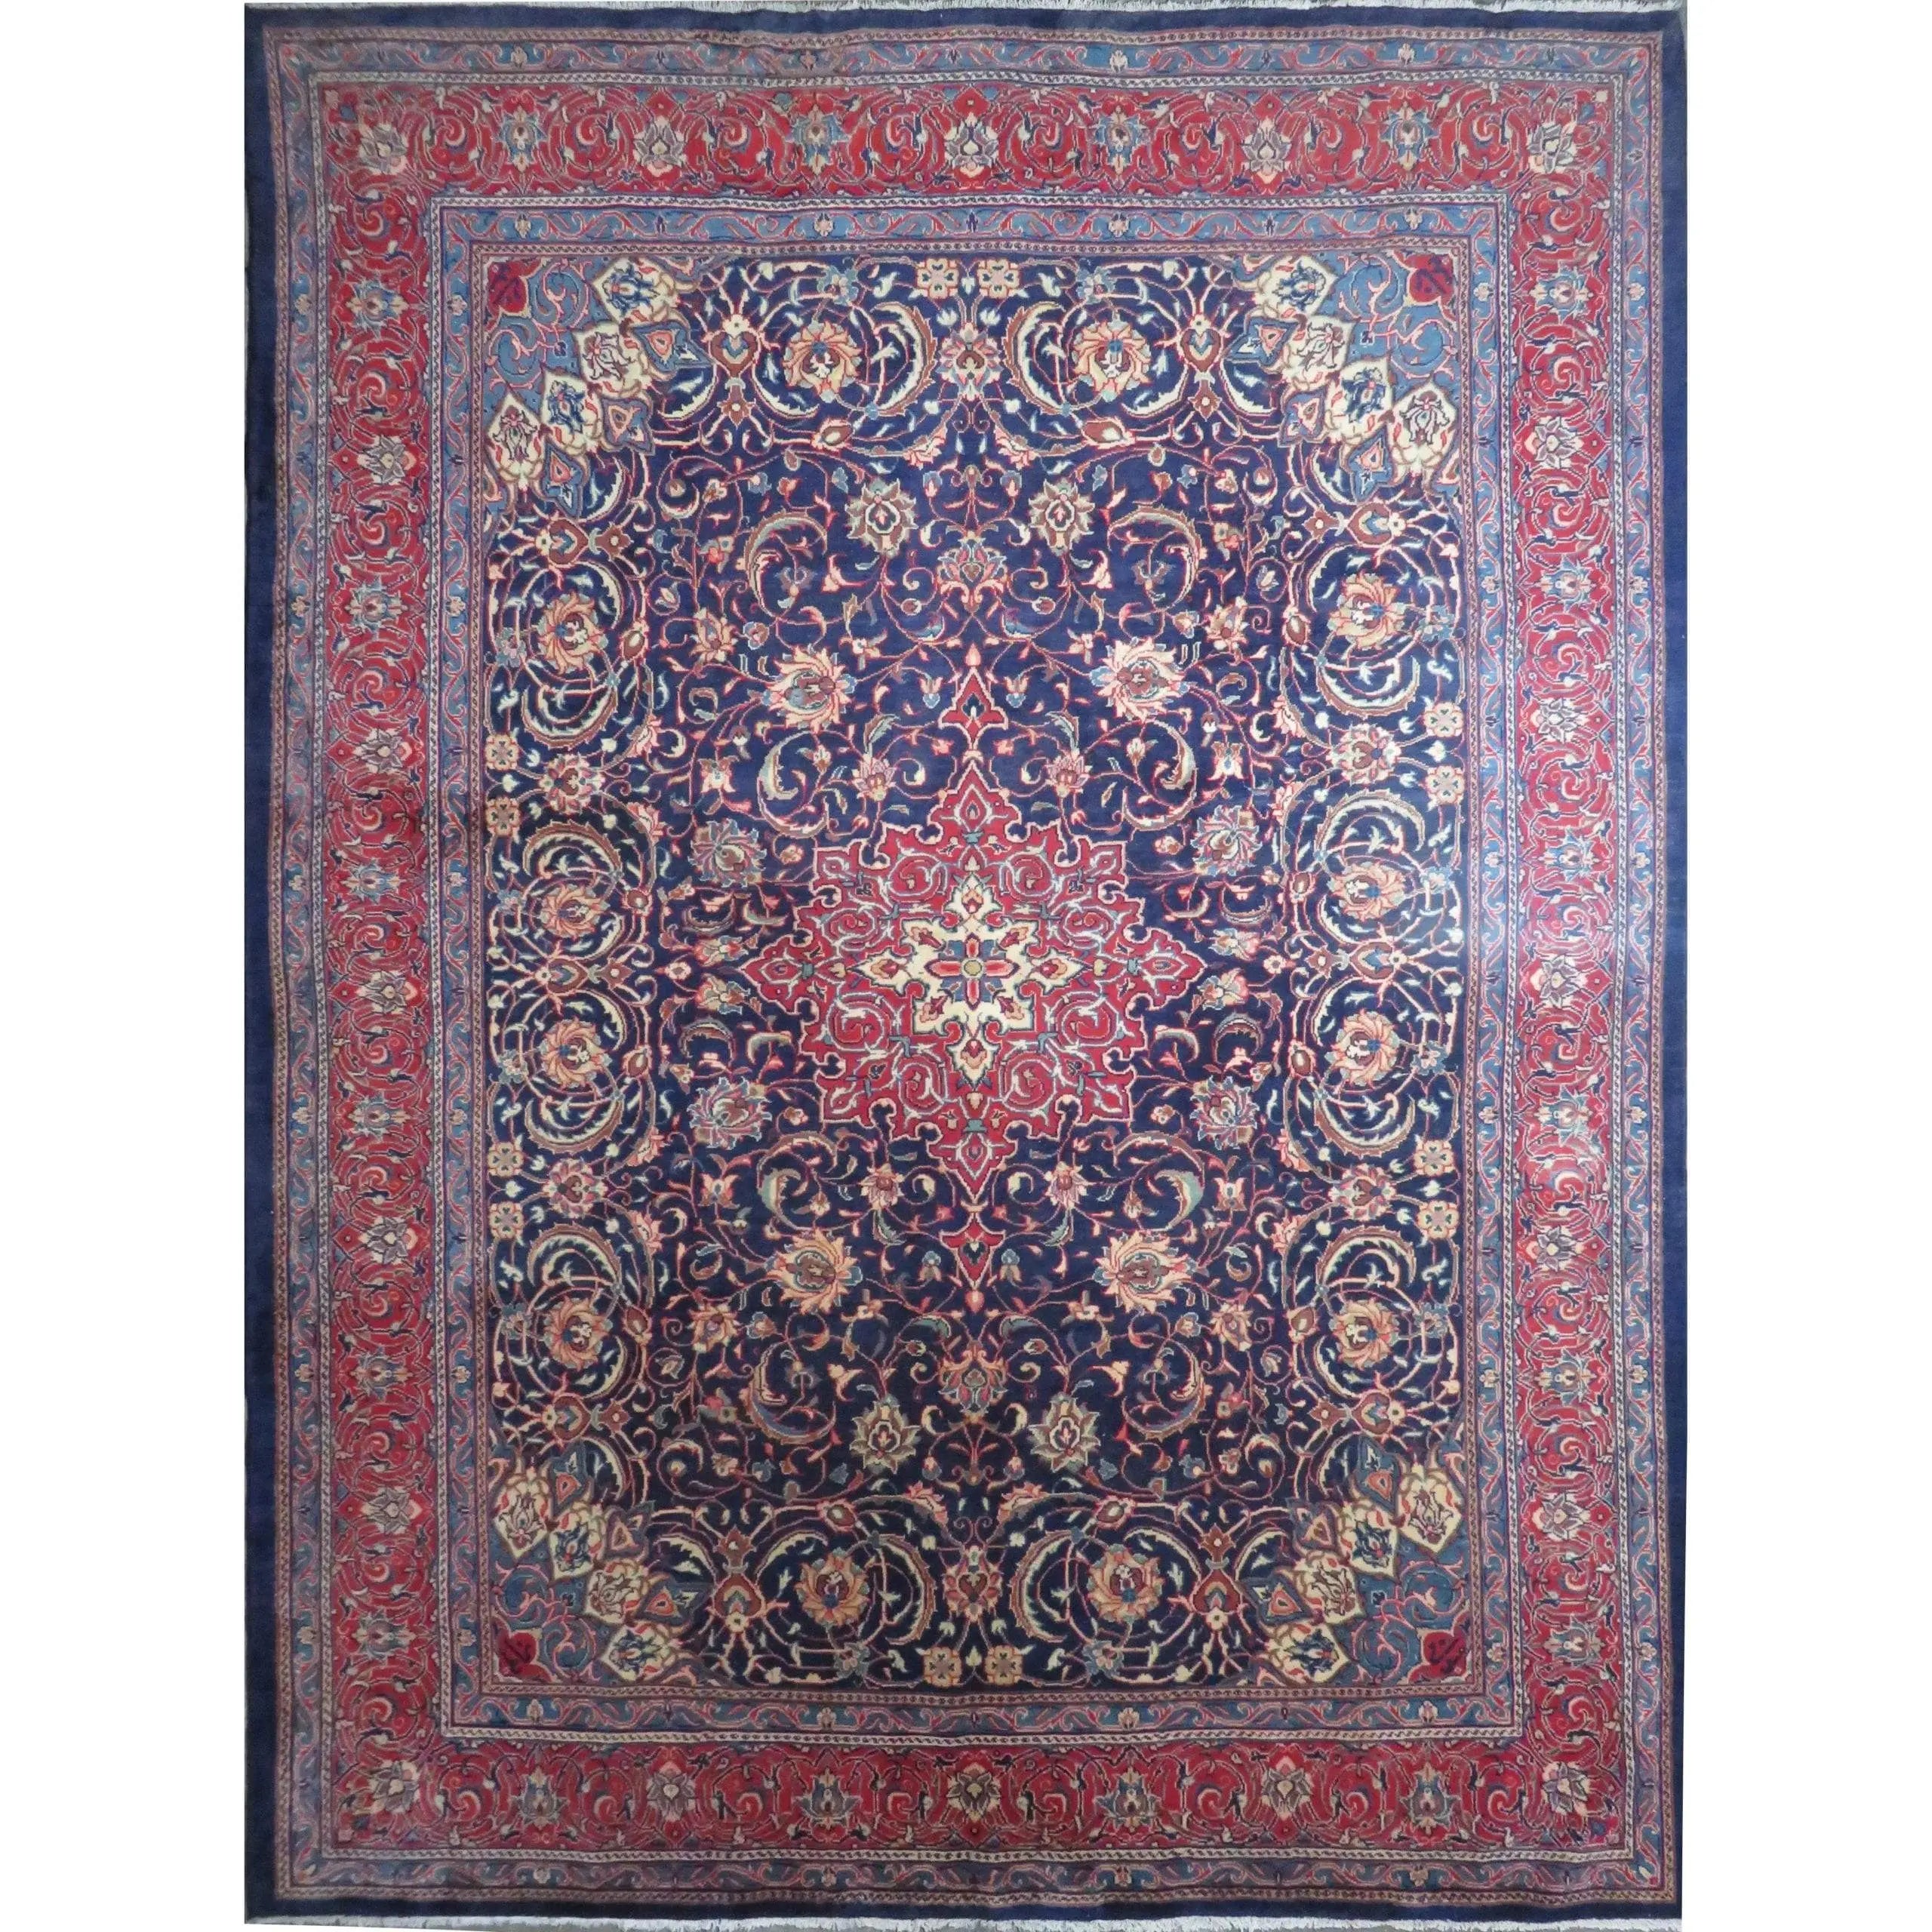 Hand-Knotted Persian Wool Rug – Luxurious Vintage Design, 13'3" x 9'7", Artisan Crafted